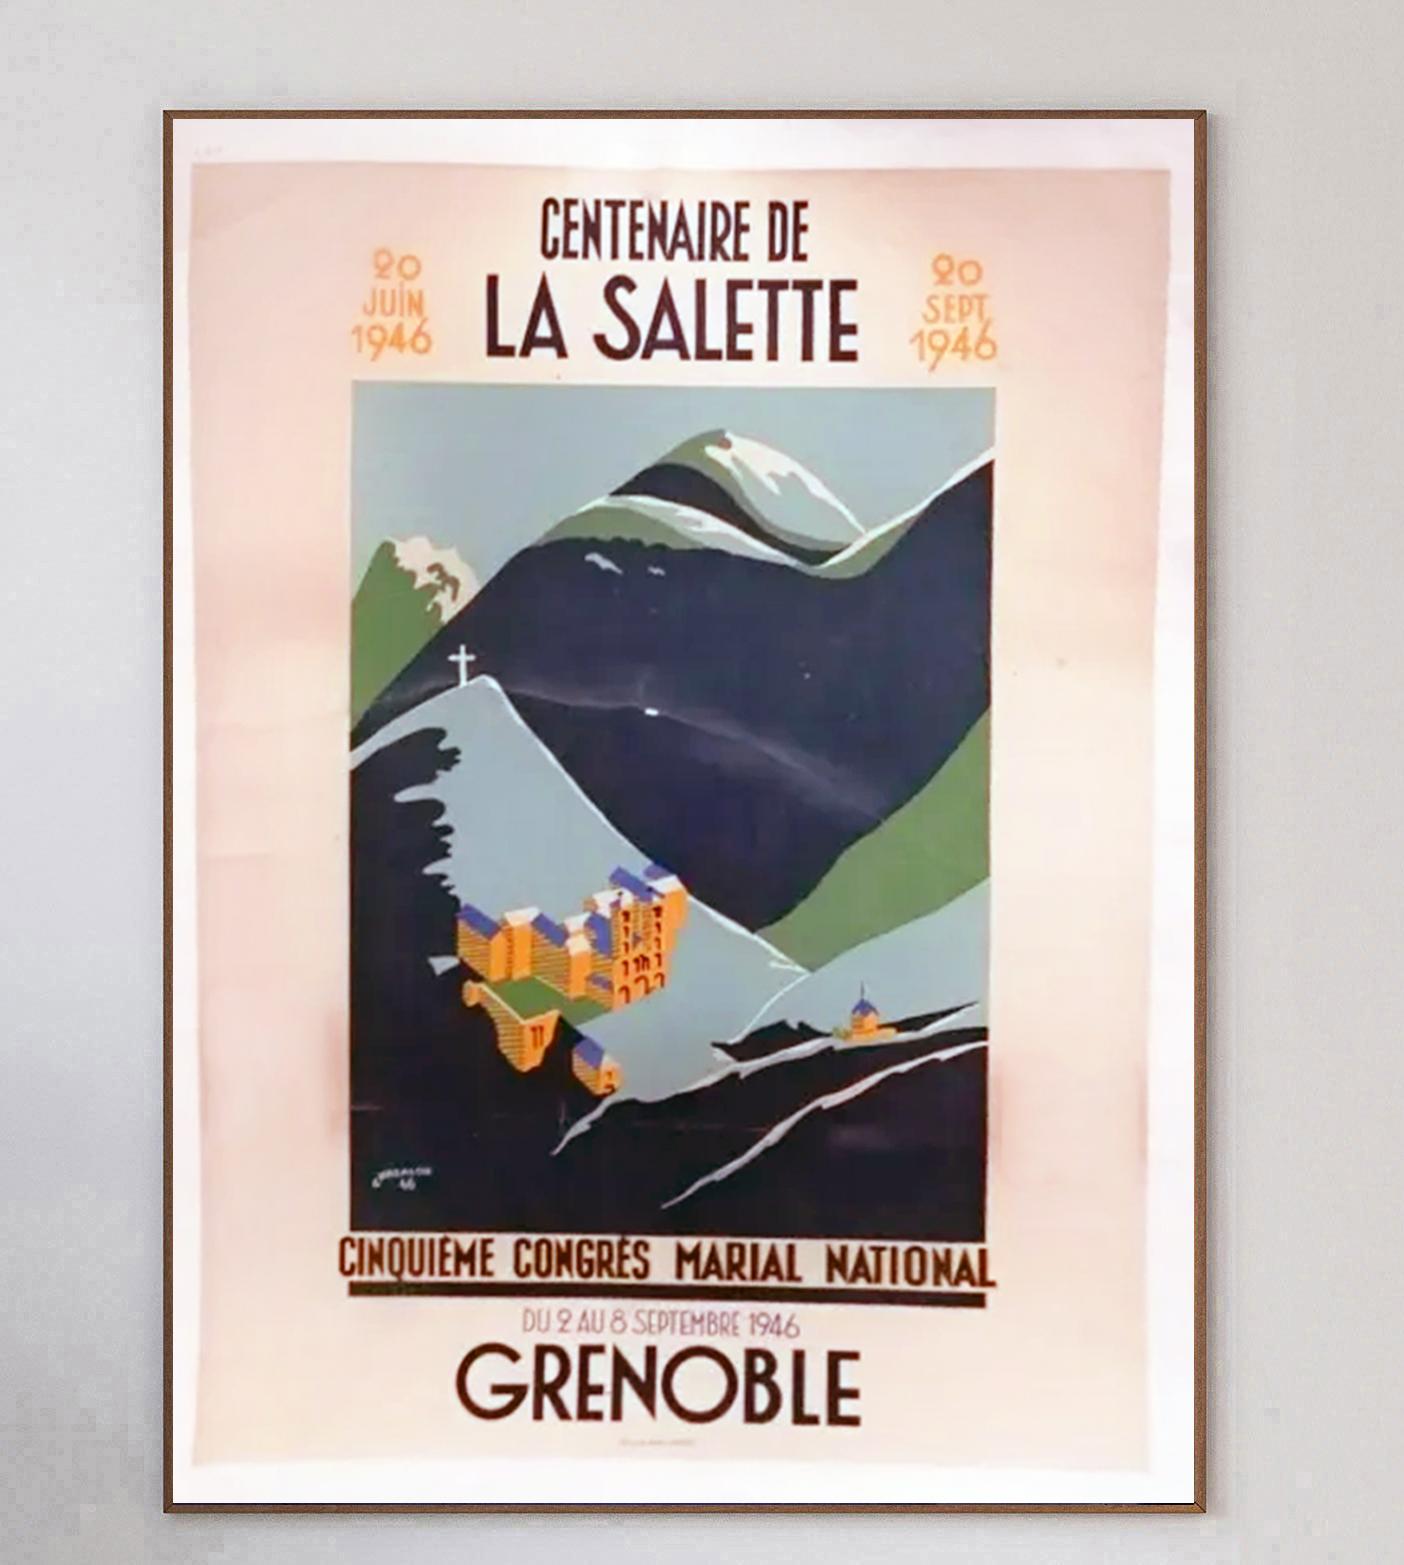 Stunning poster from 1946 creating in celebration of the Centenaire de La Salette or Centennary of Our Lady of La Salette in Grenoble. The Marian apparition was reported by two young children in 1846. 

The beautiful city of Grenoble sits in the